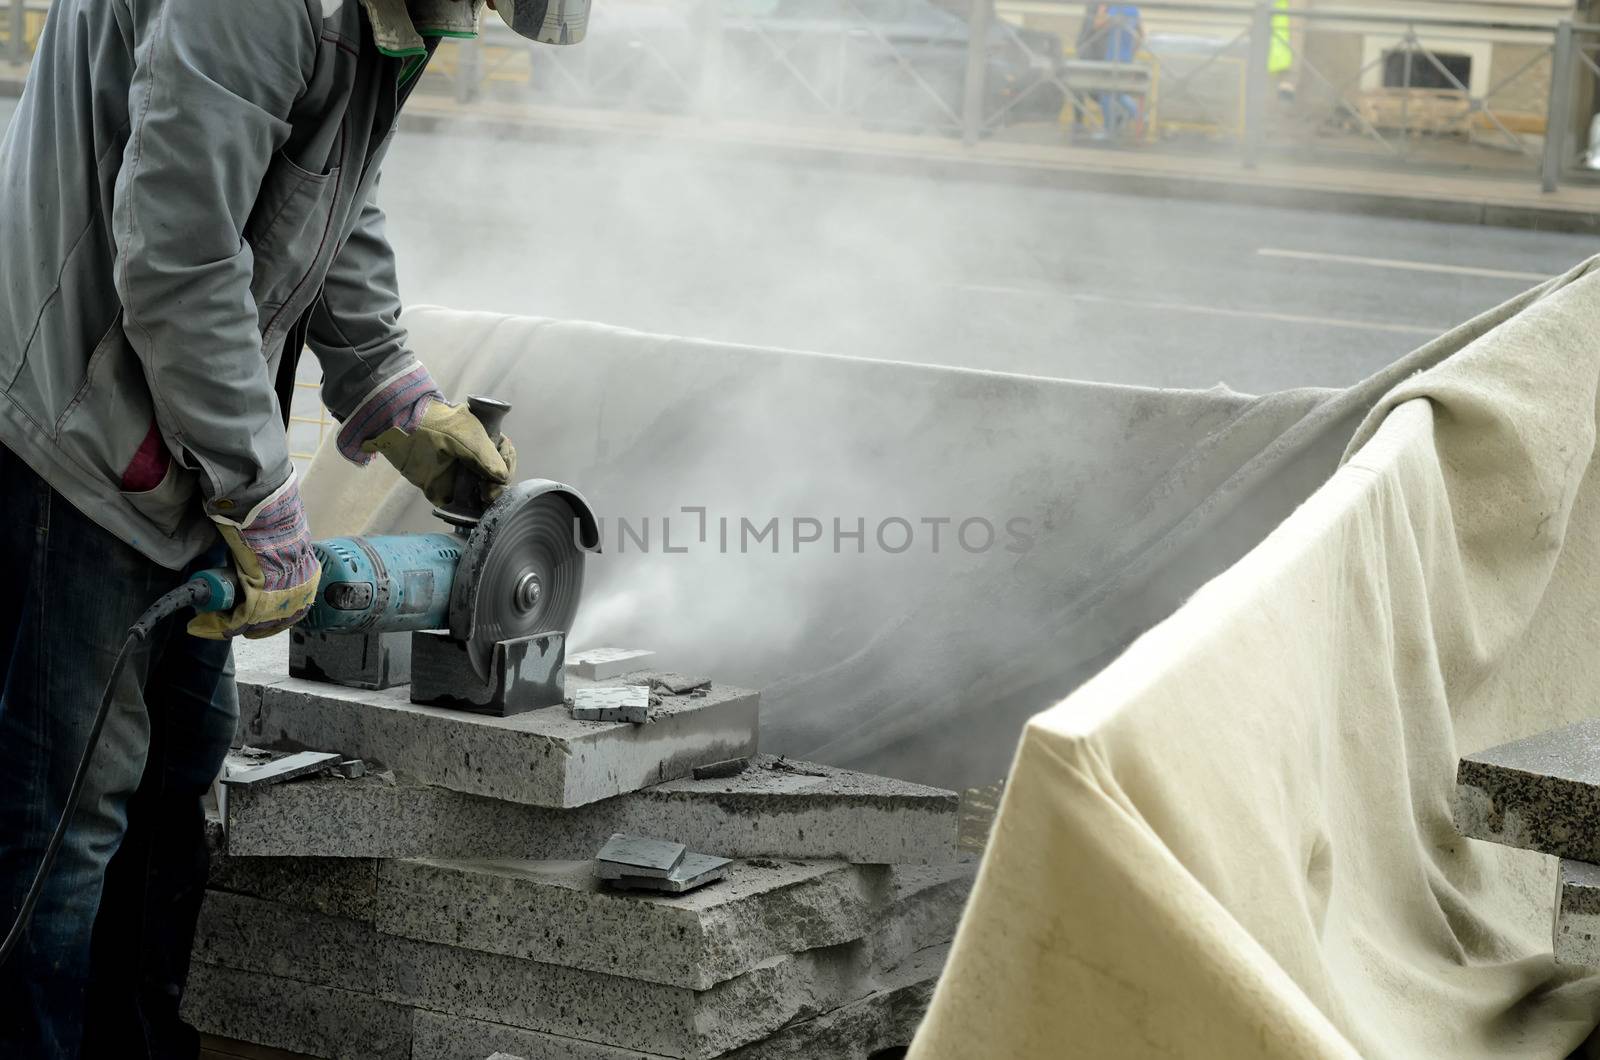 The worker cuts a big powerful angle grinder paving slabs on the street.